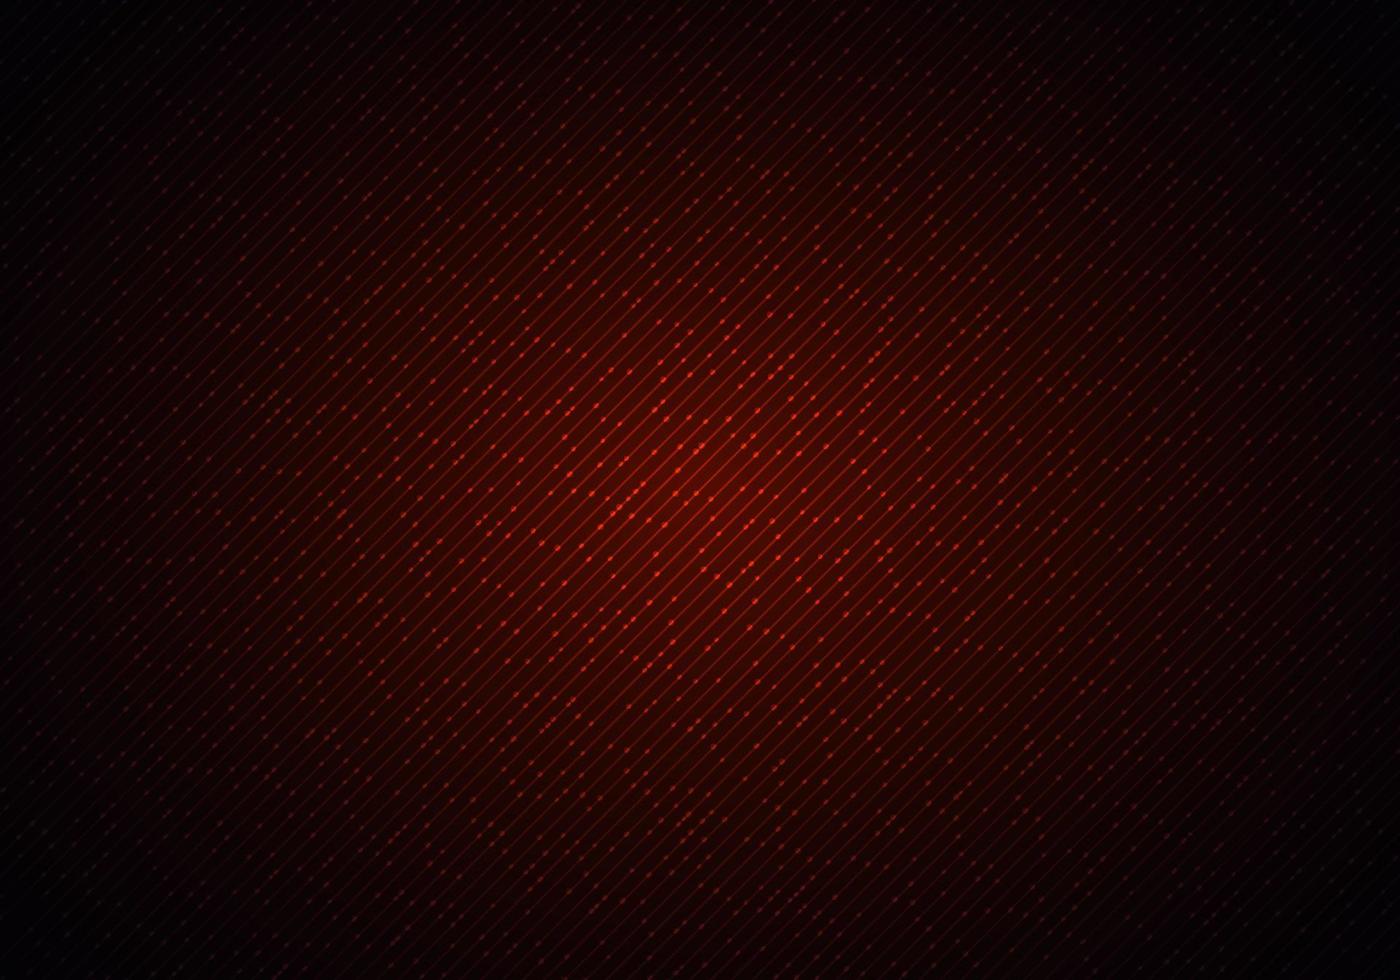 Abstract red shiny diagonal lines and dot particles with lighting on dark background vector